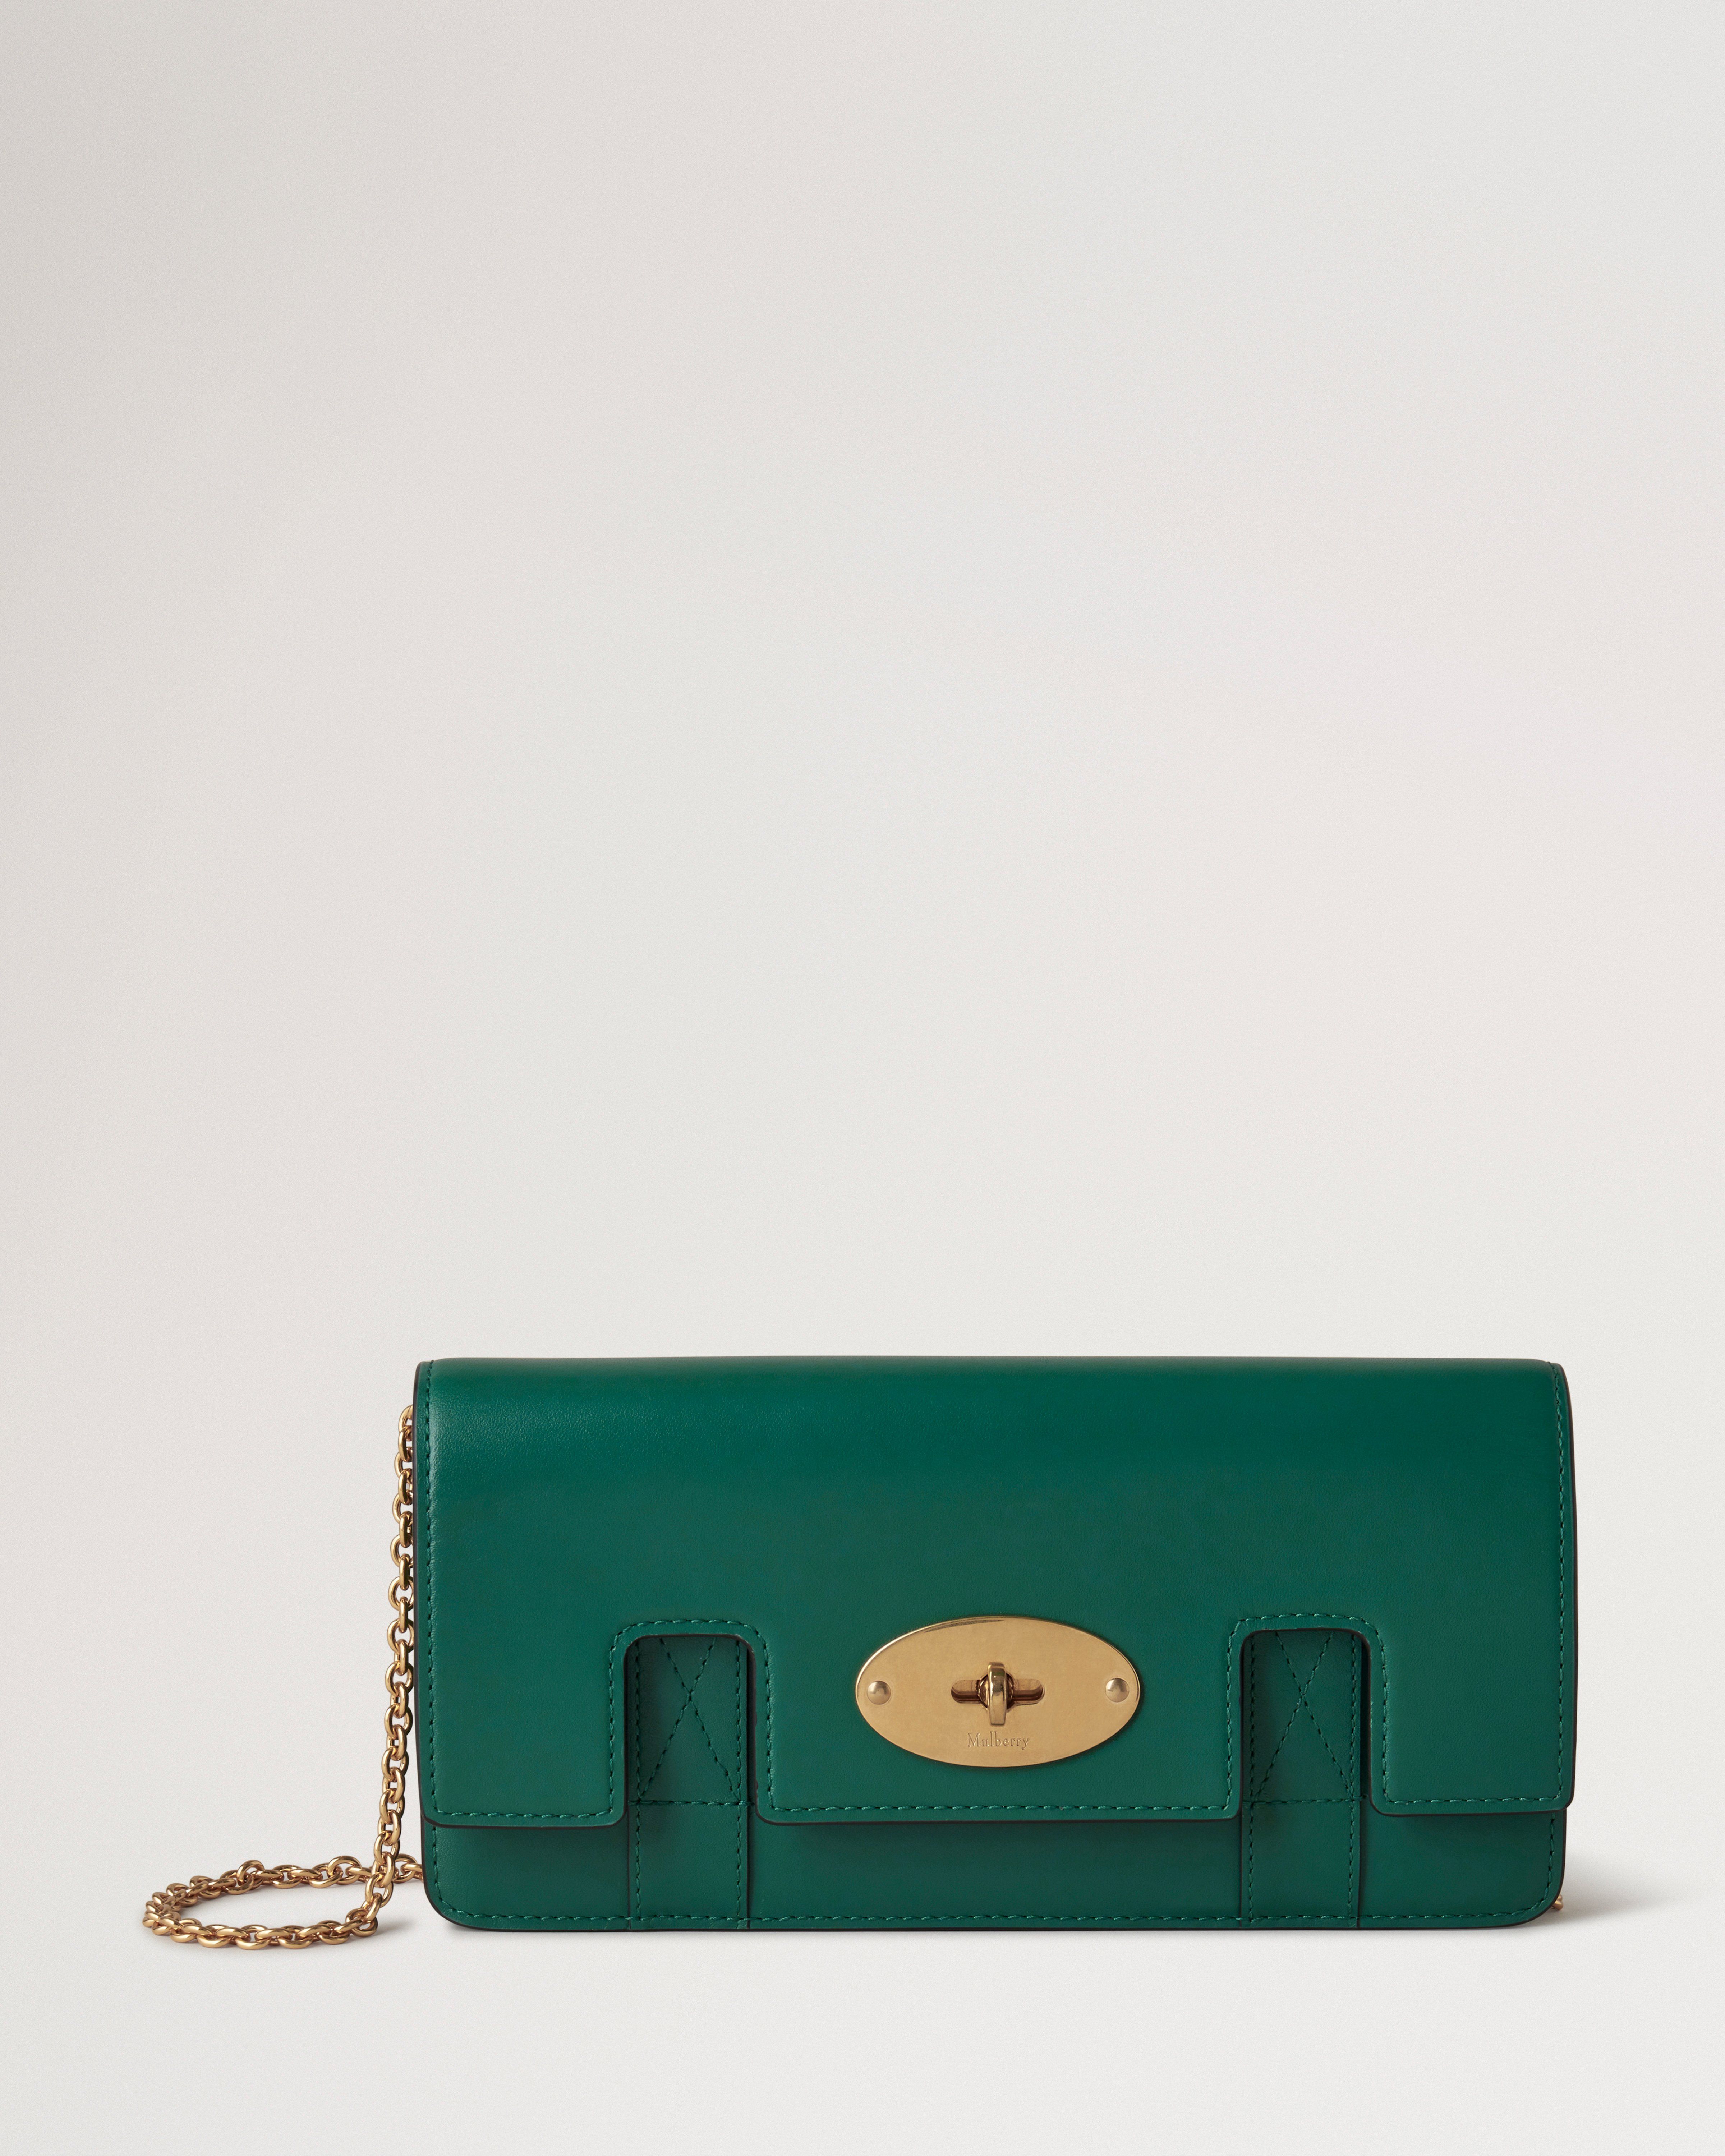 East West Bayswater Clutch | Malachite High Gloss Leather | Bayswater ...